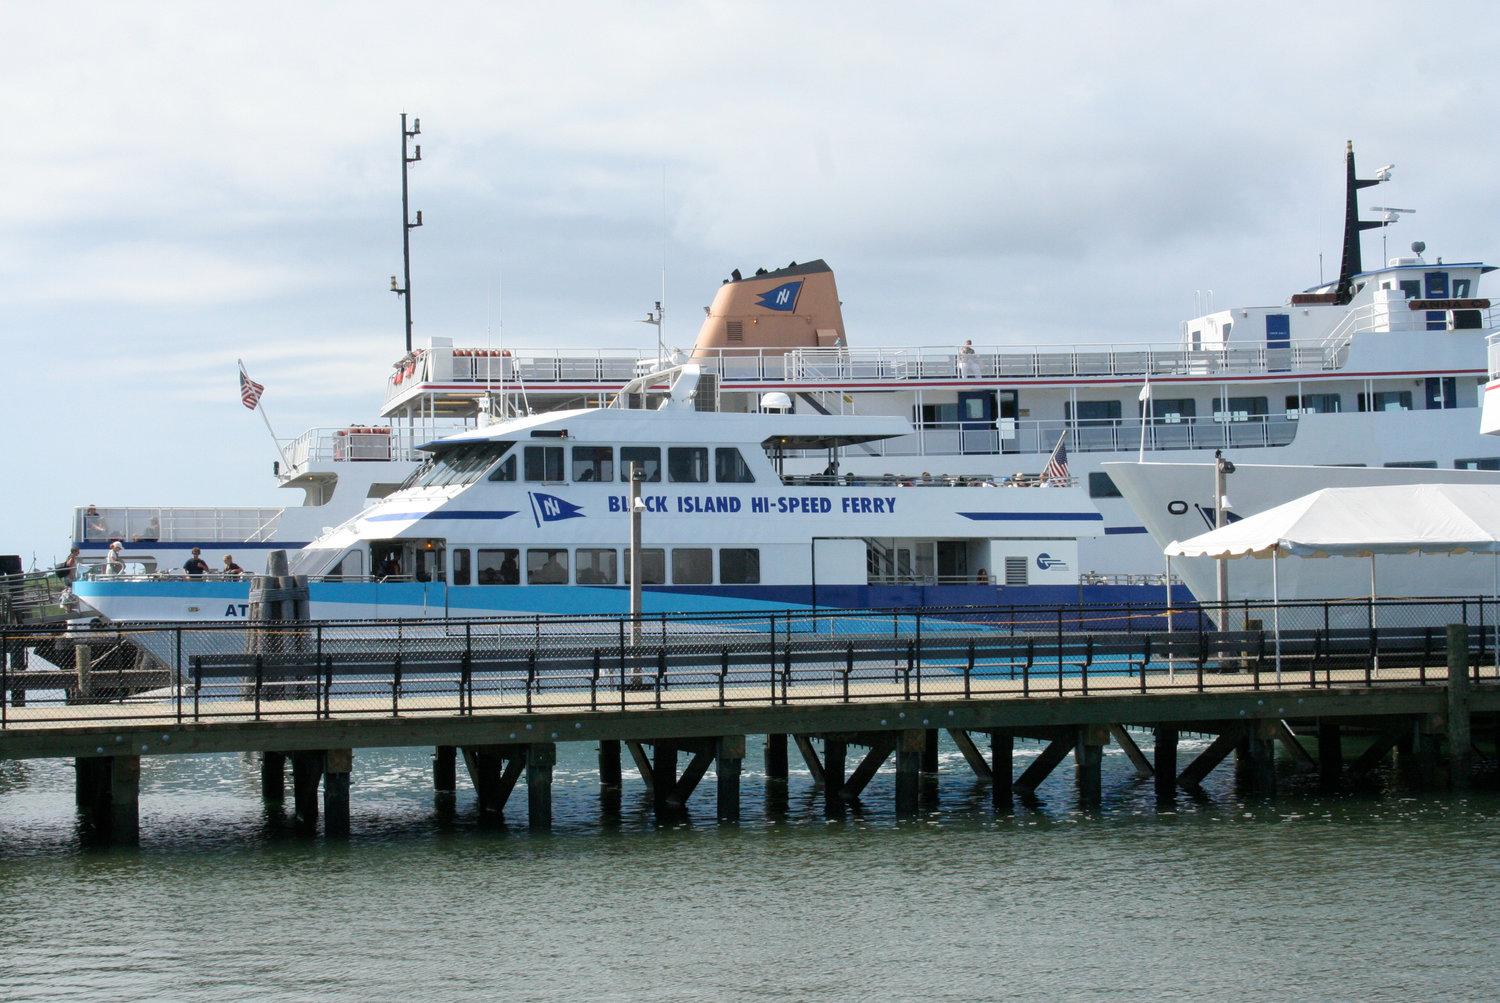 Board the high-speed or traditional ferry for an island getaway